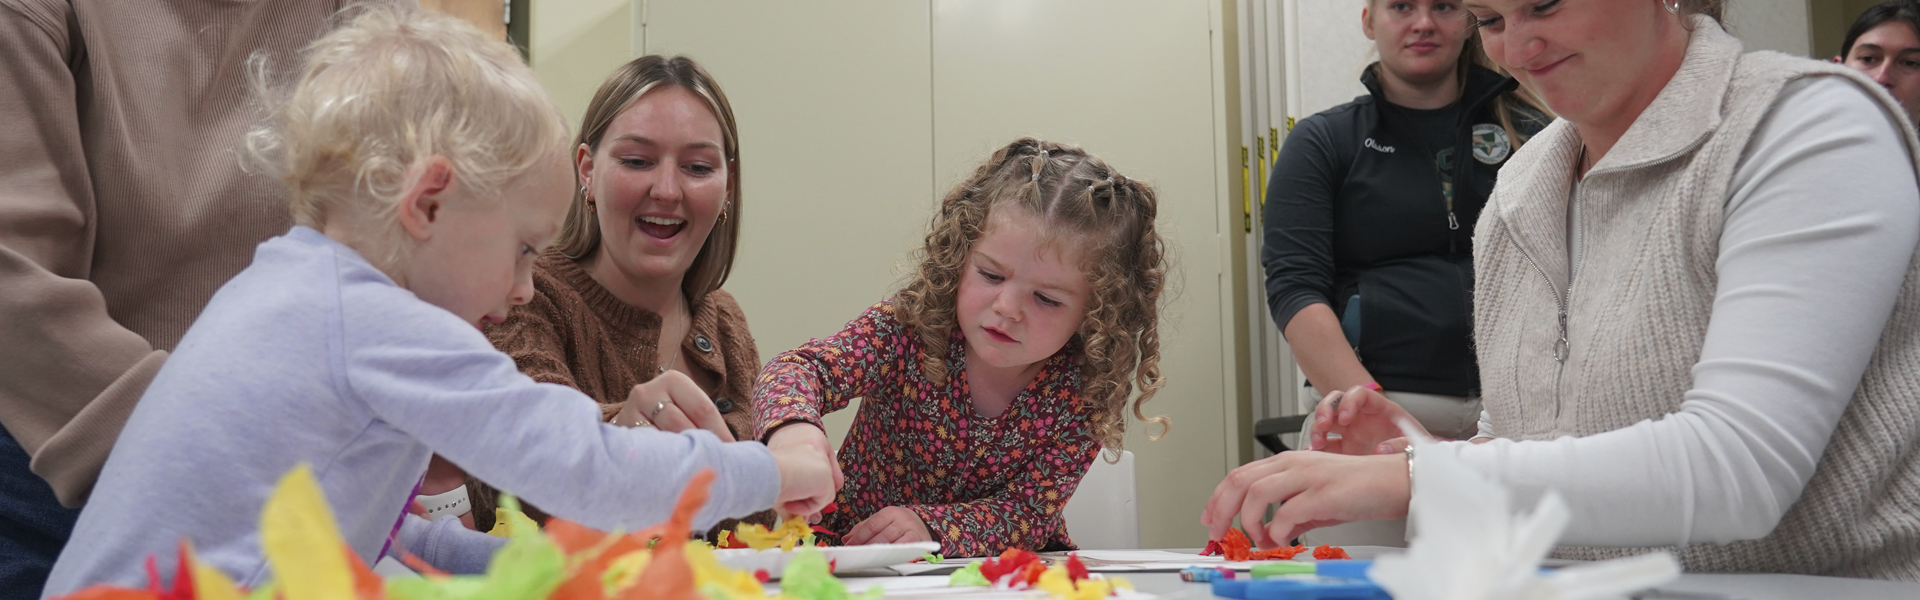 School of Occupational Therapy students work with children in a classroom setting